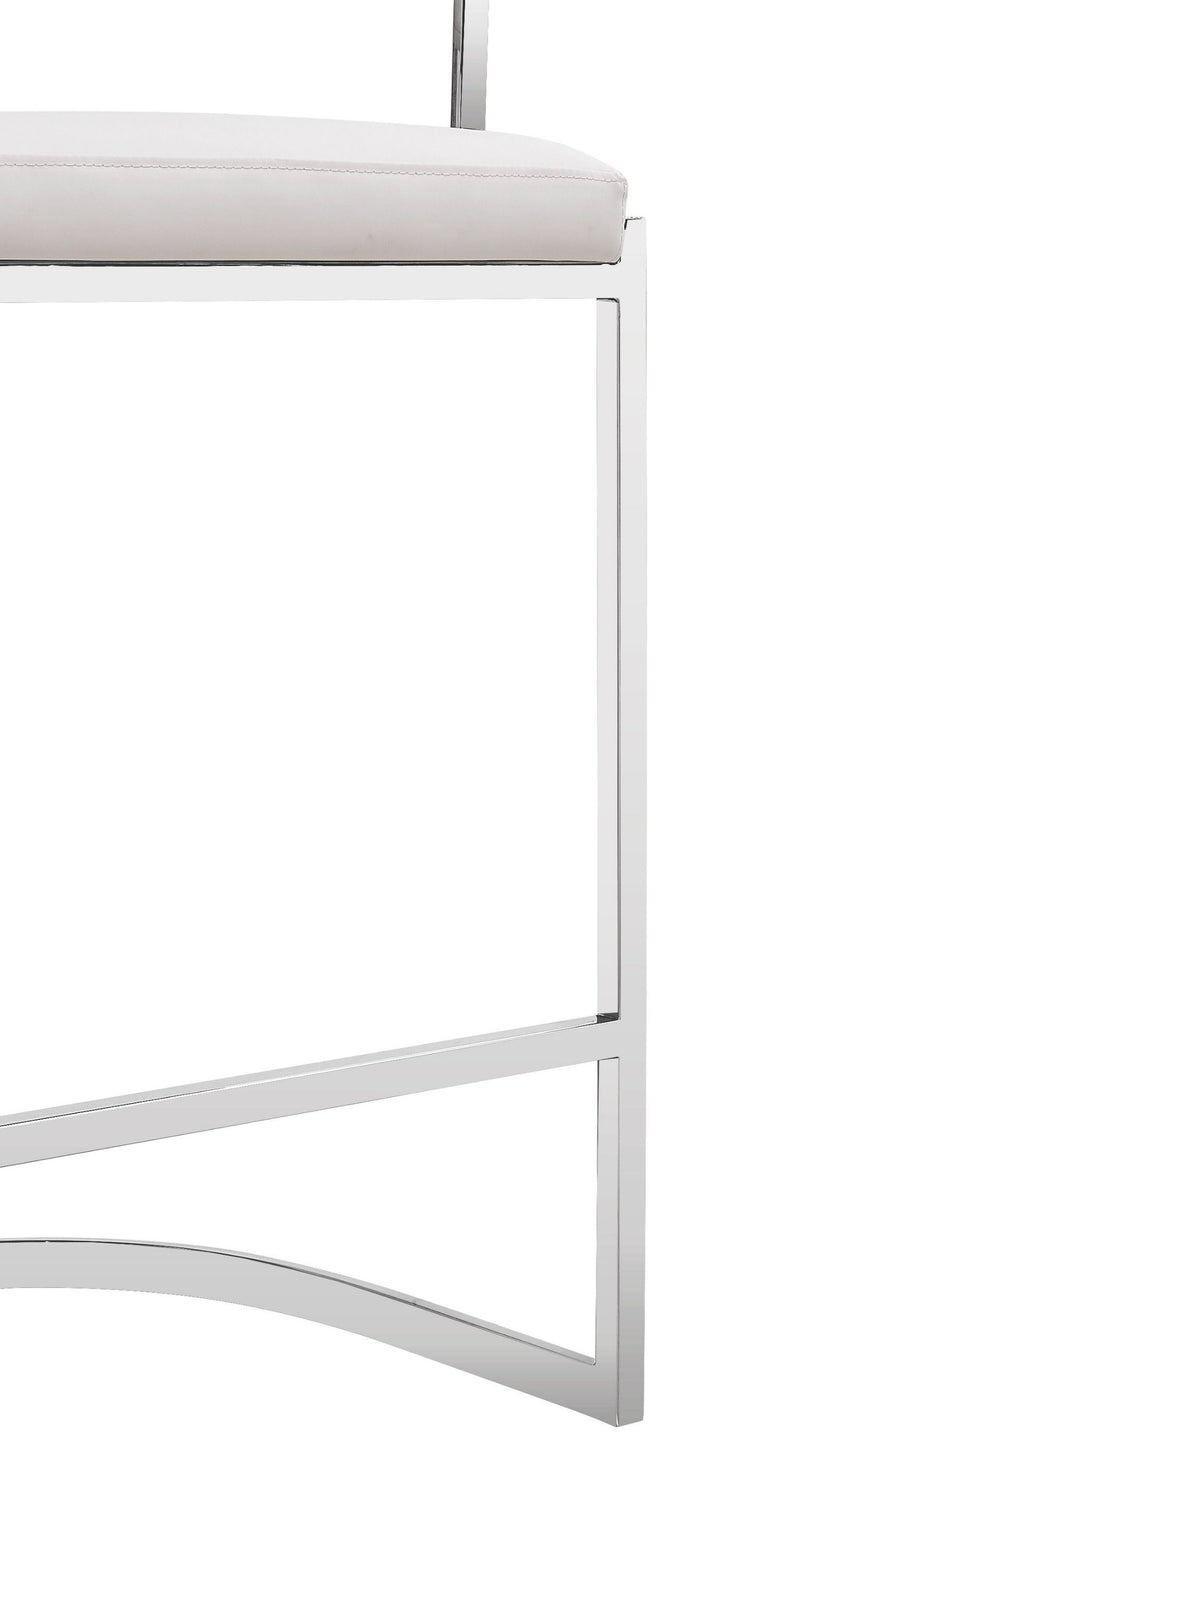 Clancy Modern White Vegan Leather + Stainless Steel Counter Chair